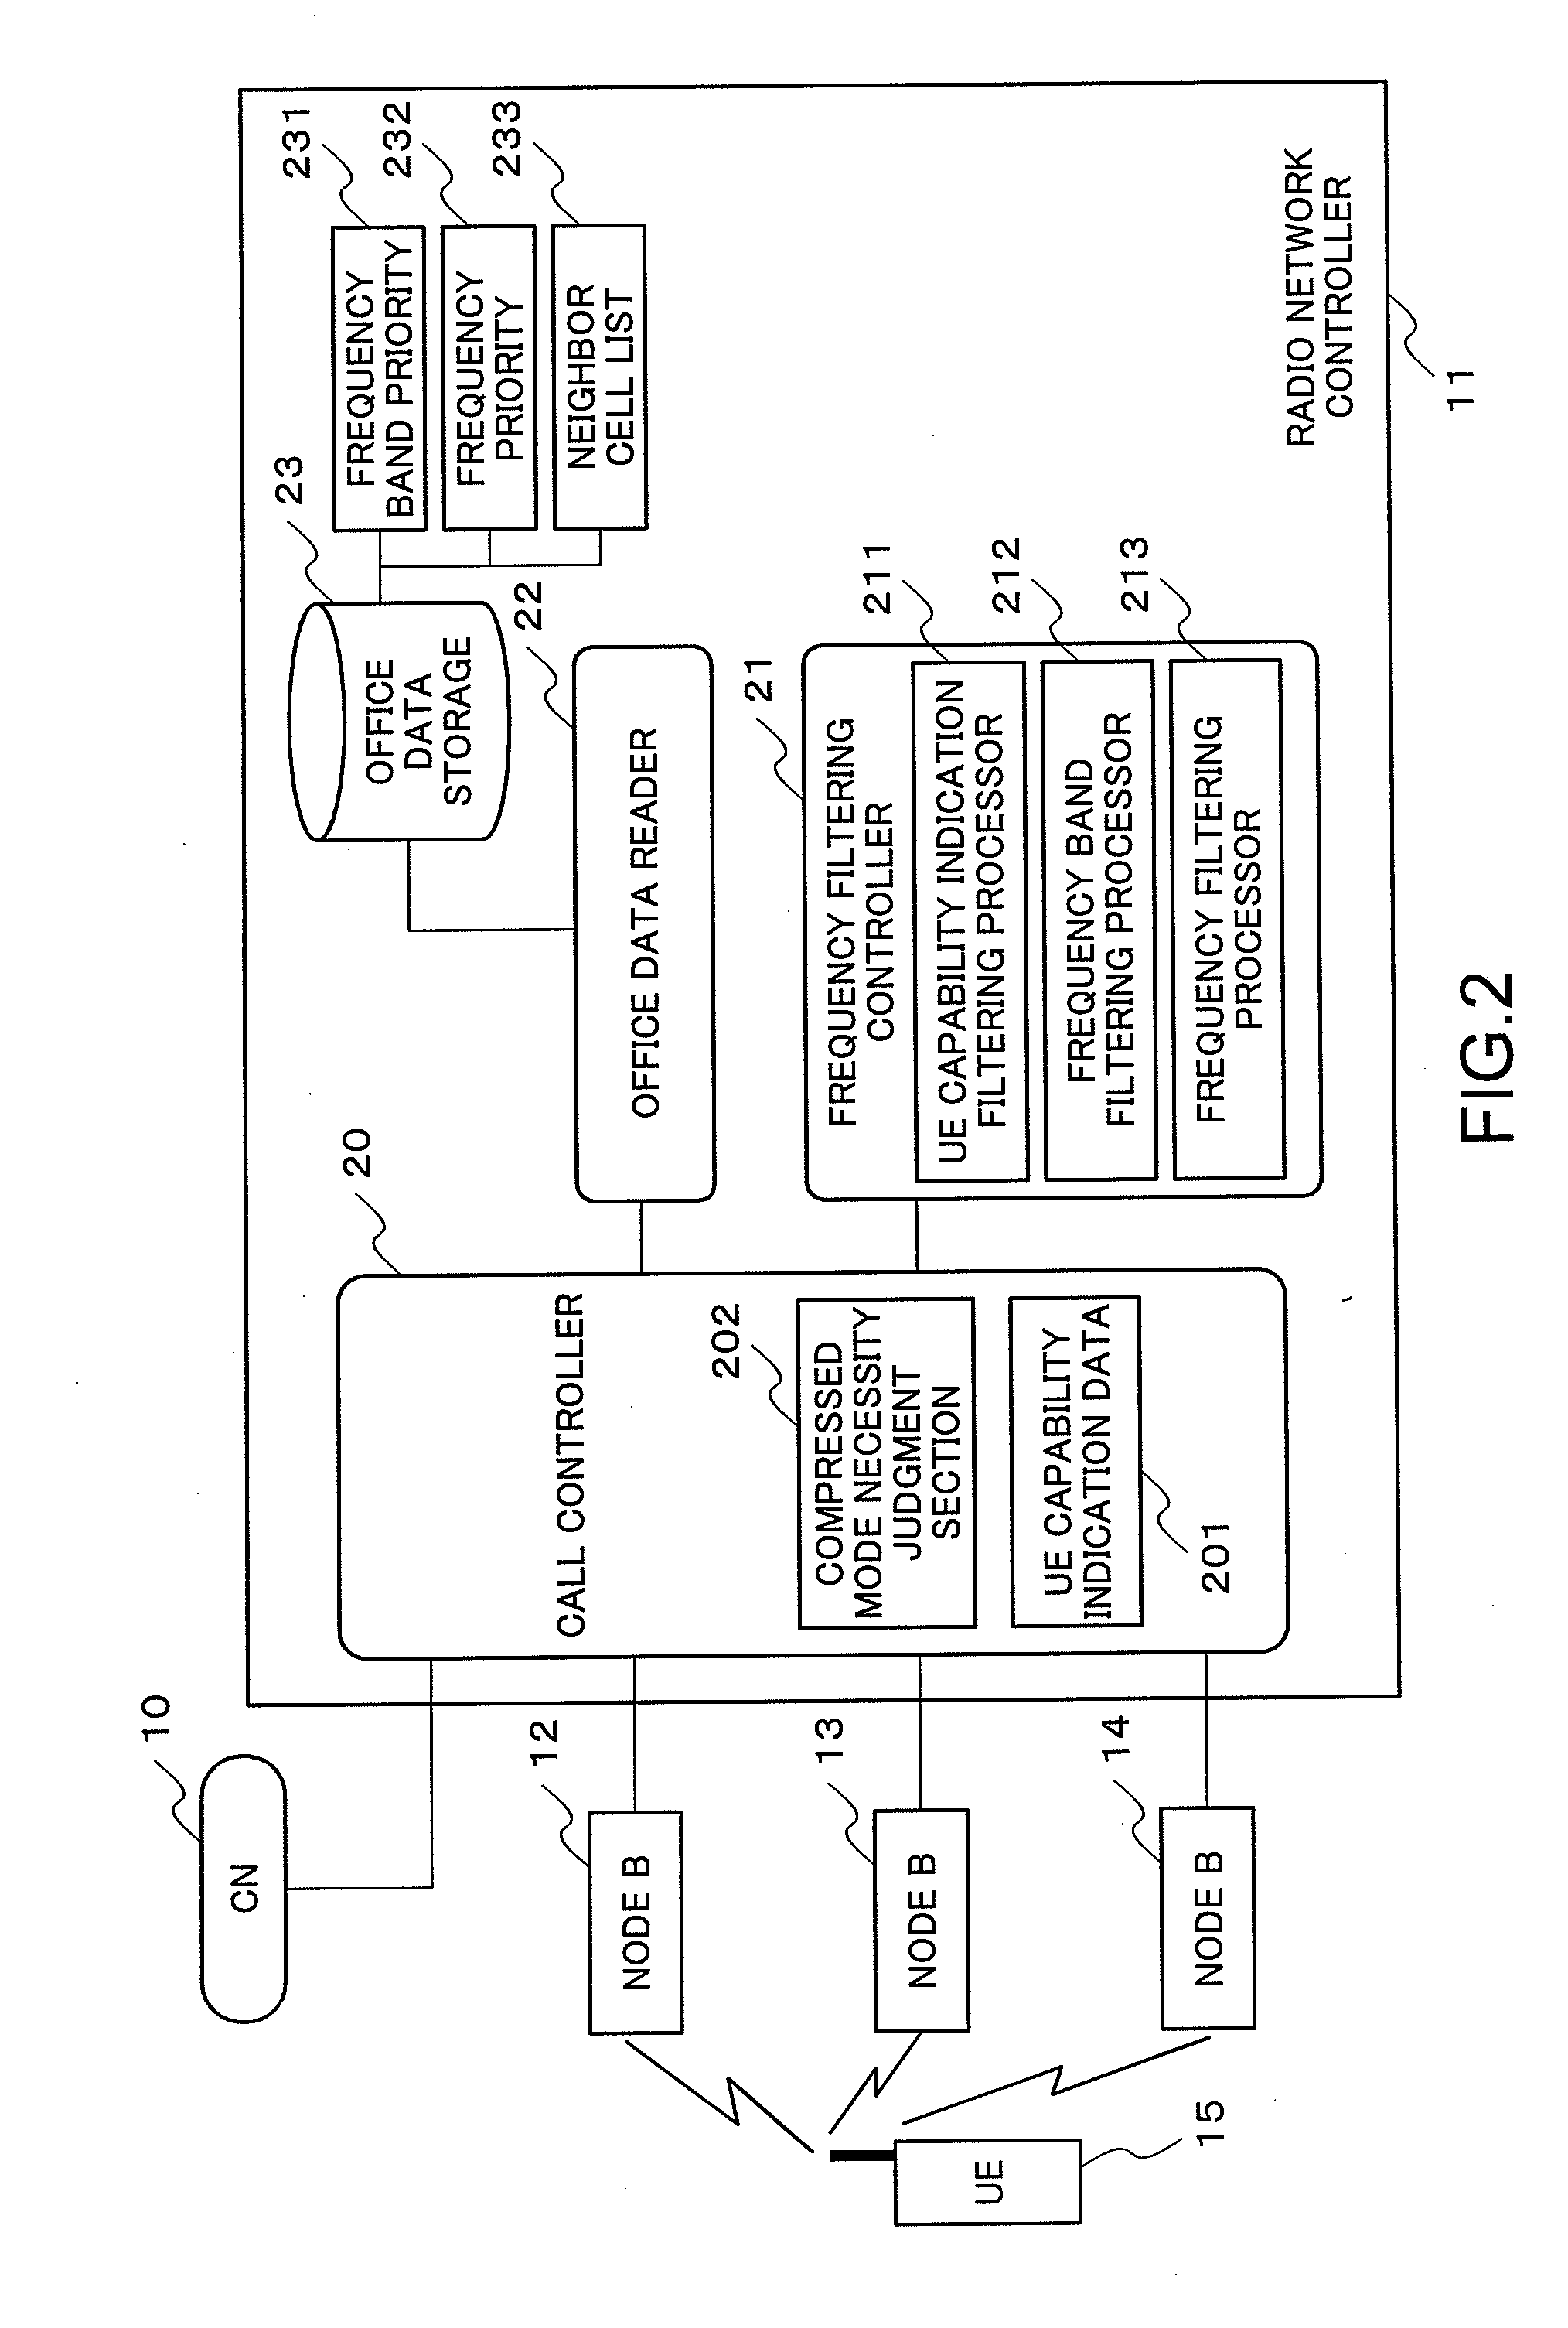 Radio network controller, a mobile communication system, and a neighbor cell list filtering method